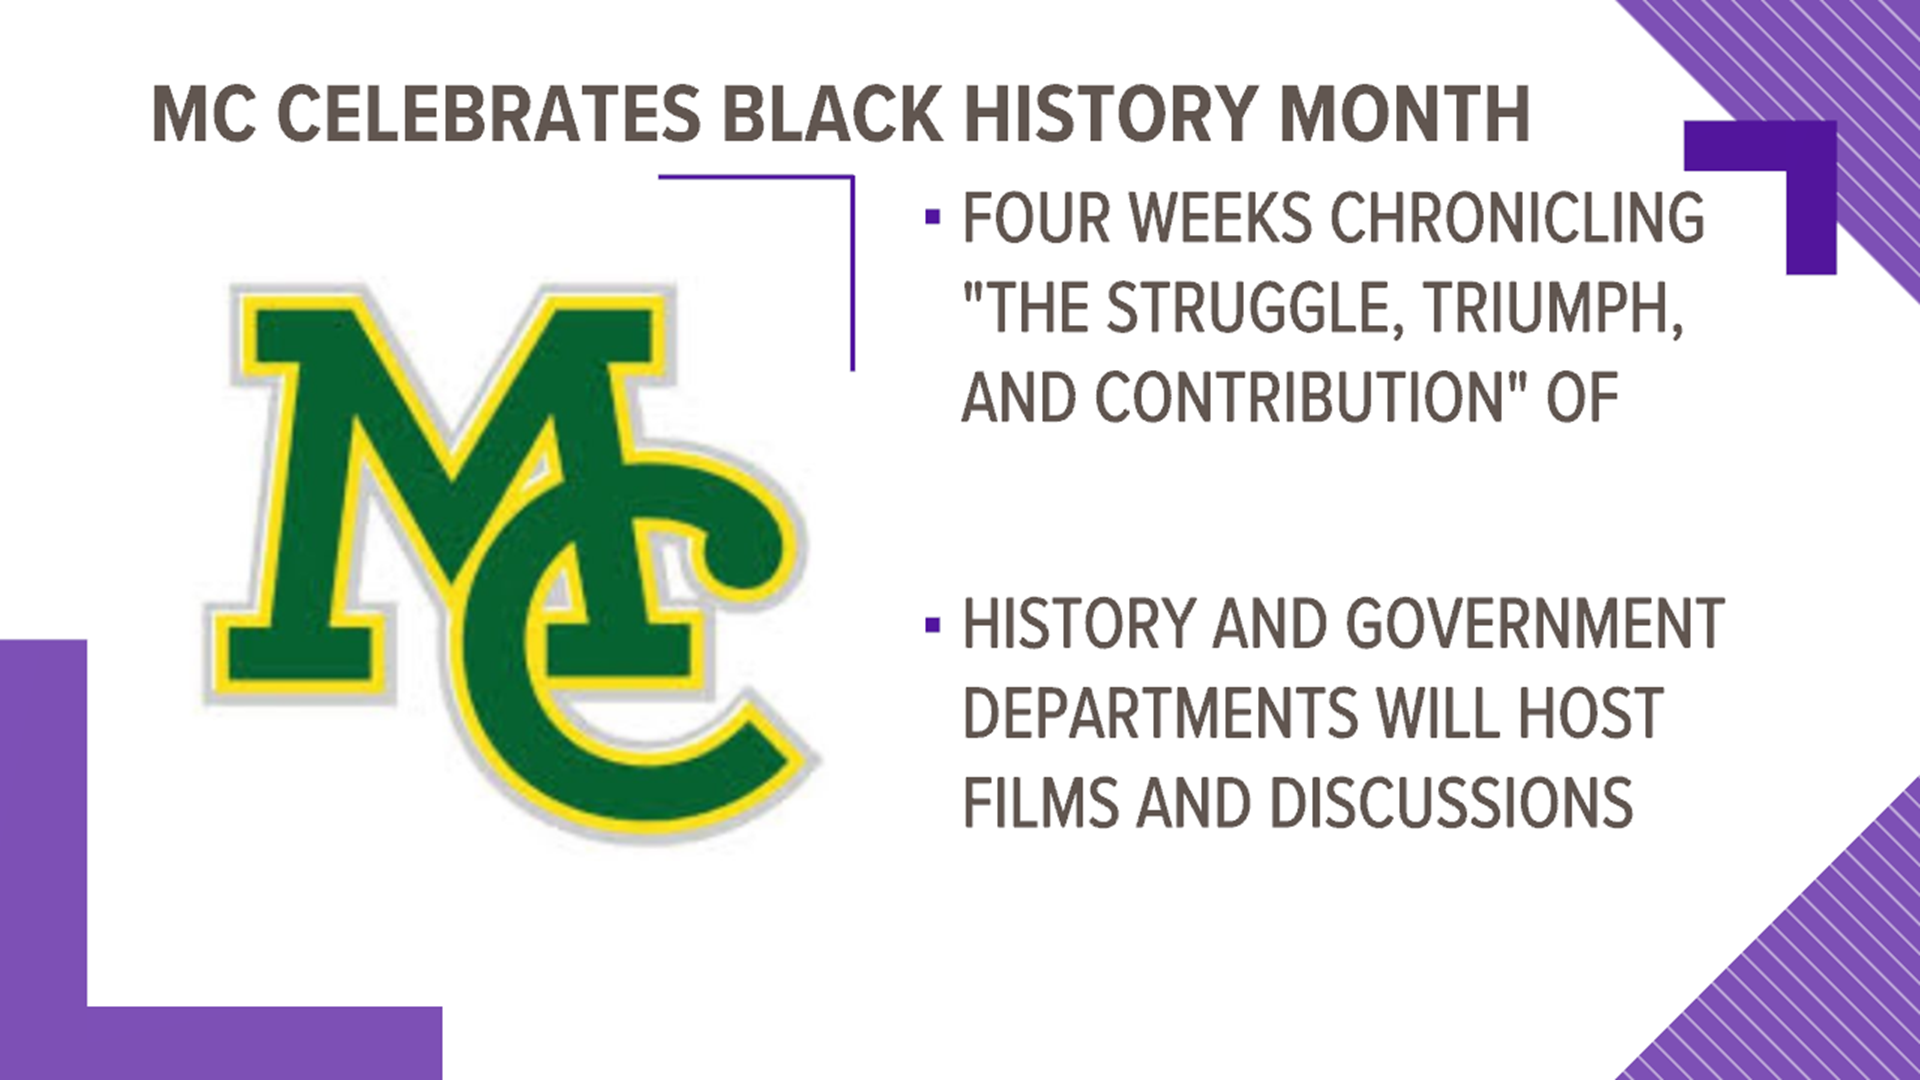 The college will be hosting a series of videos, films, and virtual discussions on Black and African American history throughout February.